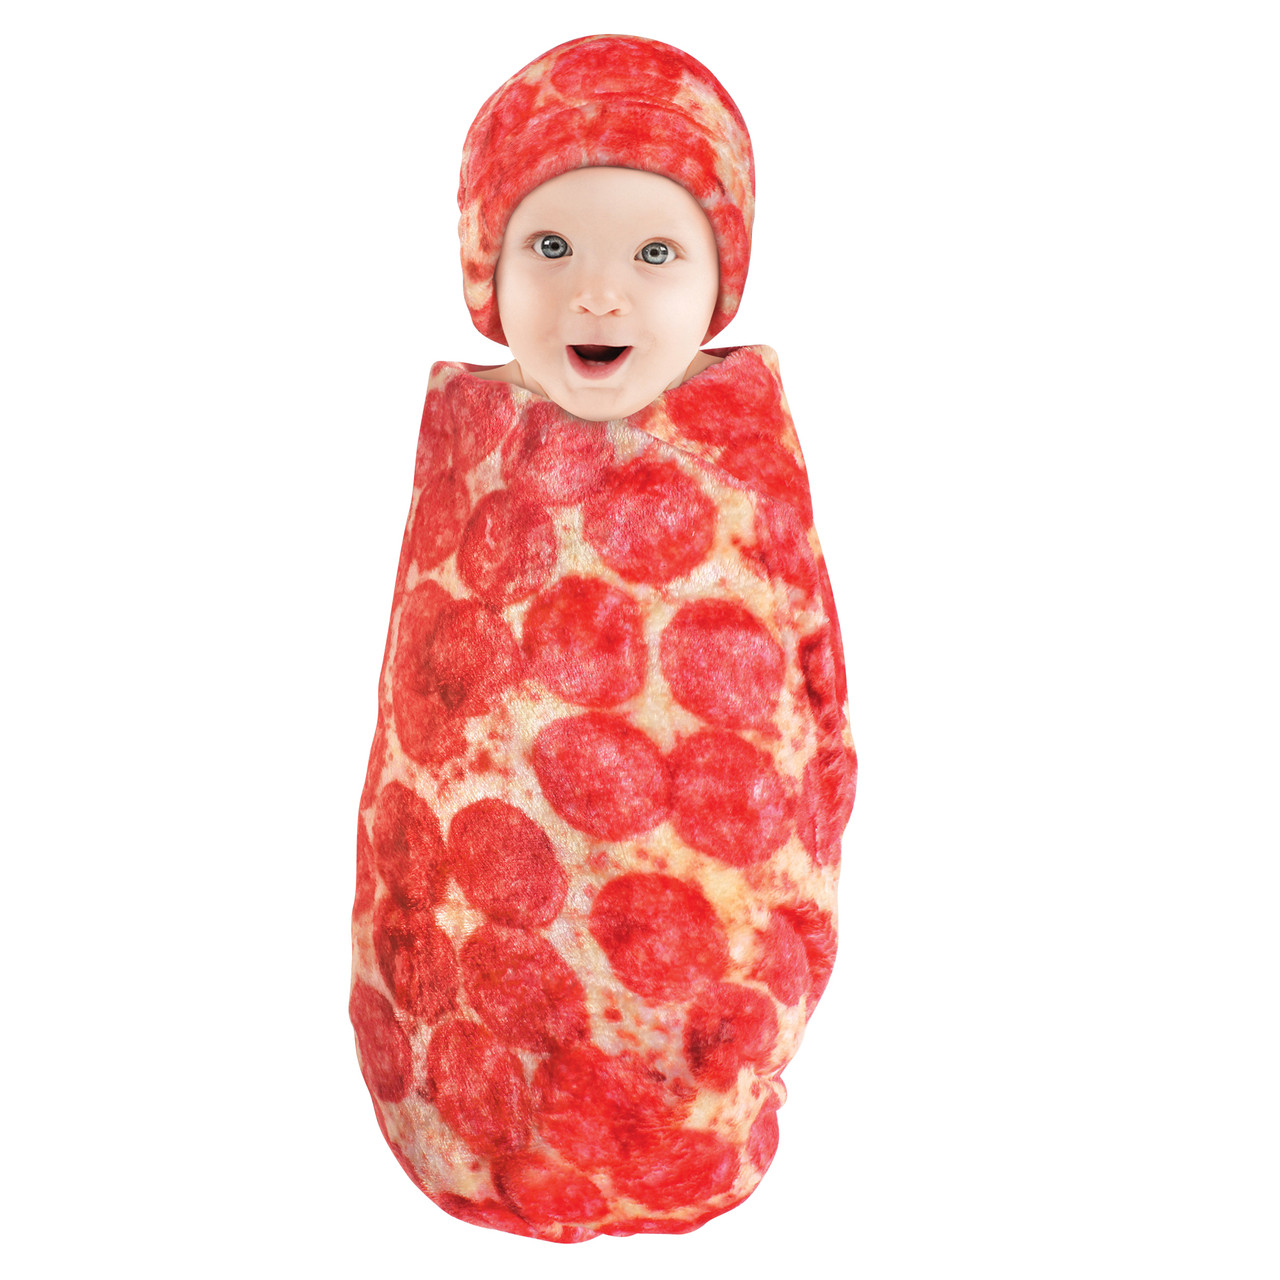 Realistic Pizza Blanket Burrito Soft And Cuddly Gift For Kids And